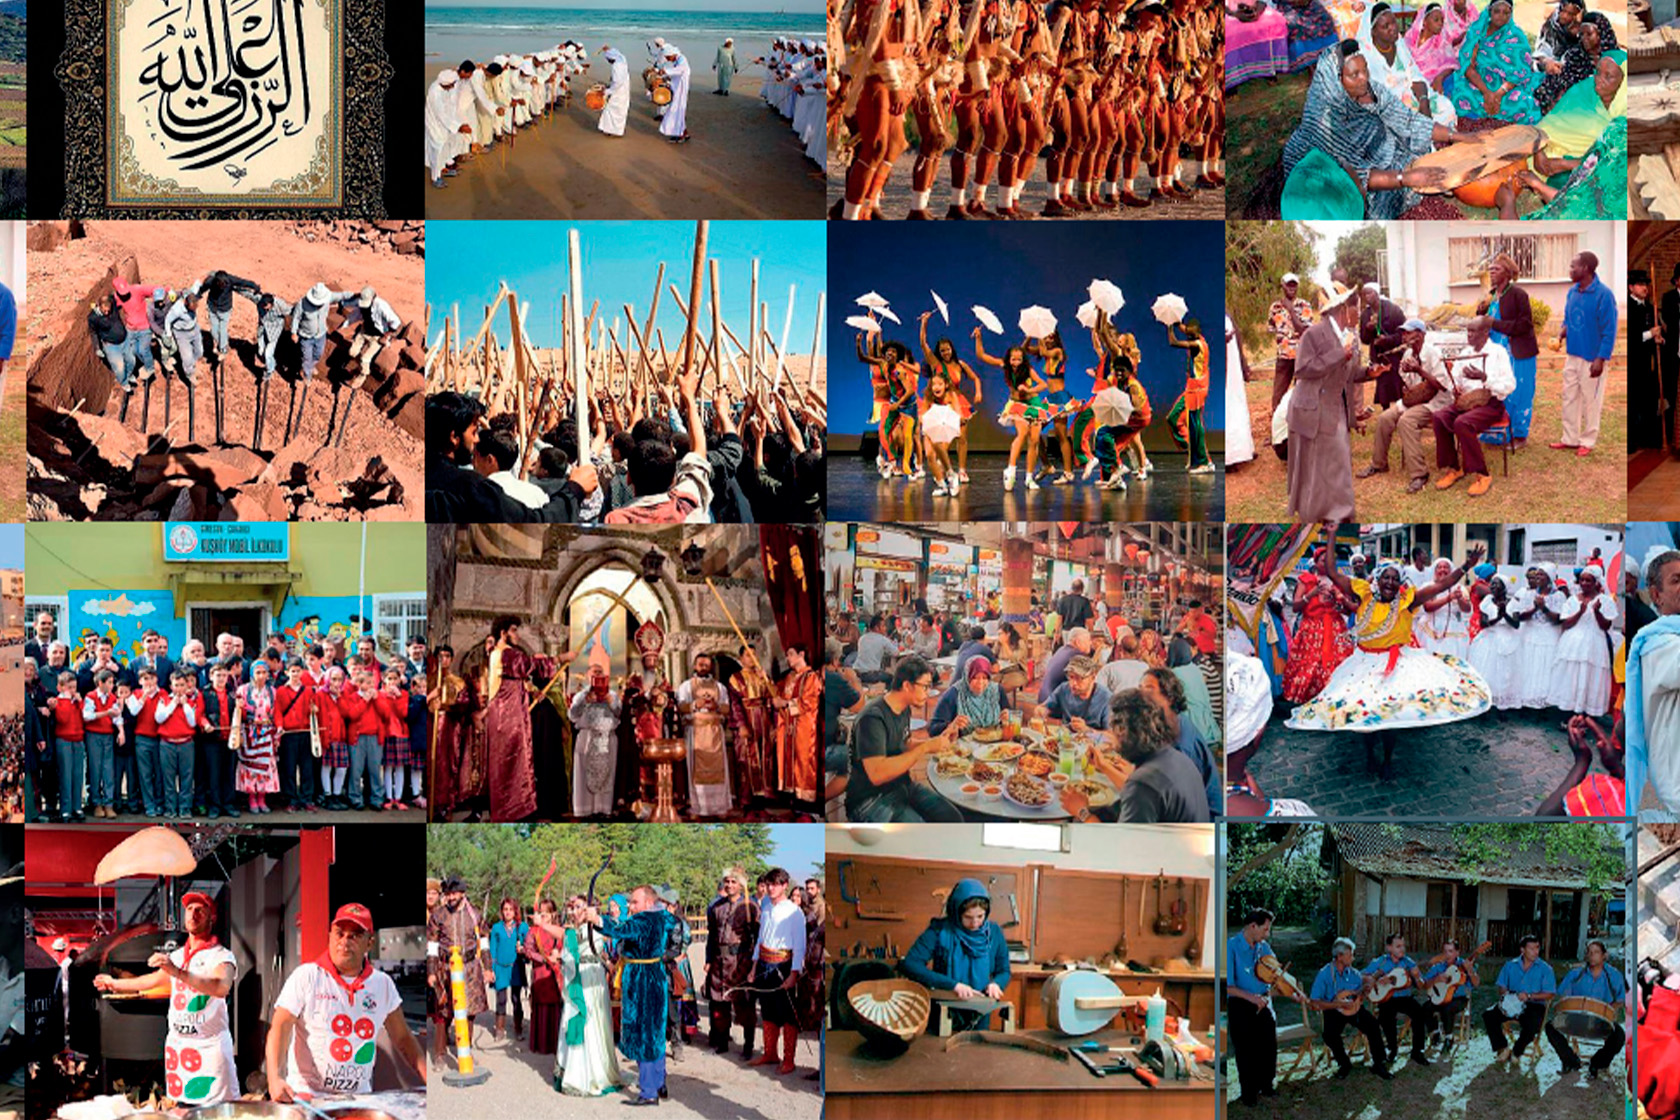 Photo collage representing the traditions and practices that are part of the UNESCO’s intangible cultural heritage in different parts of the world.